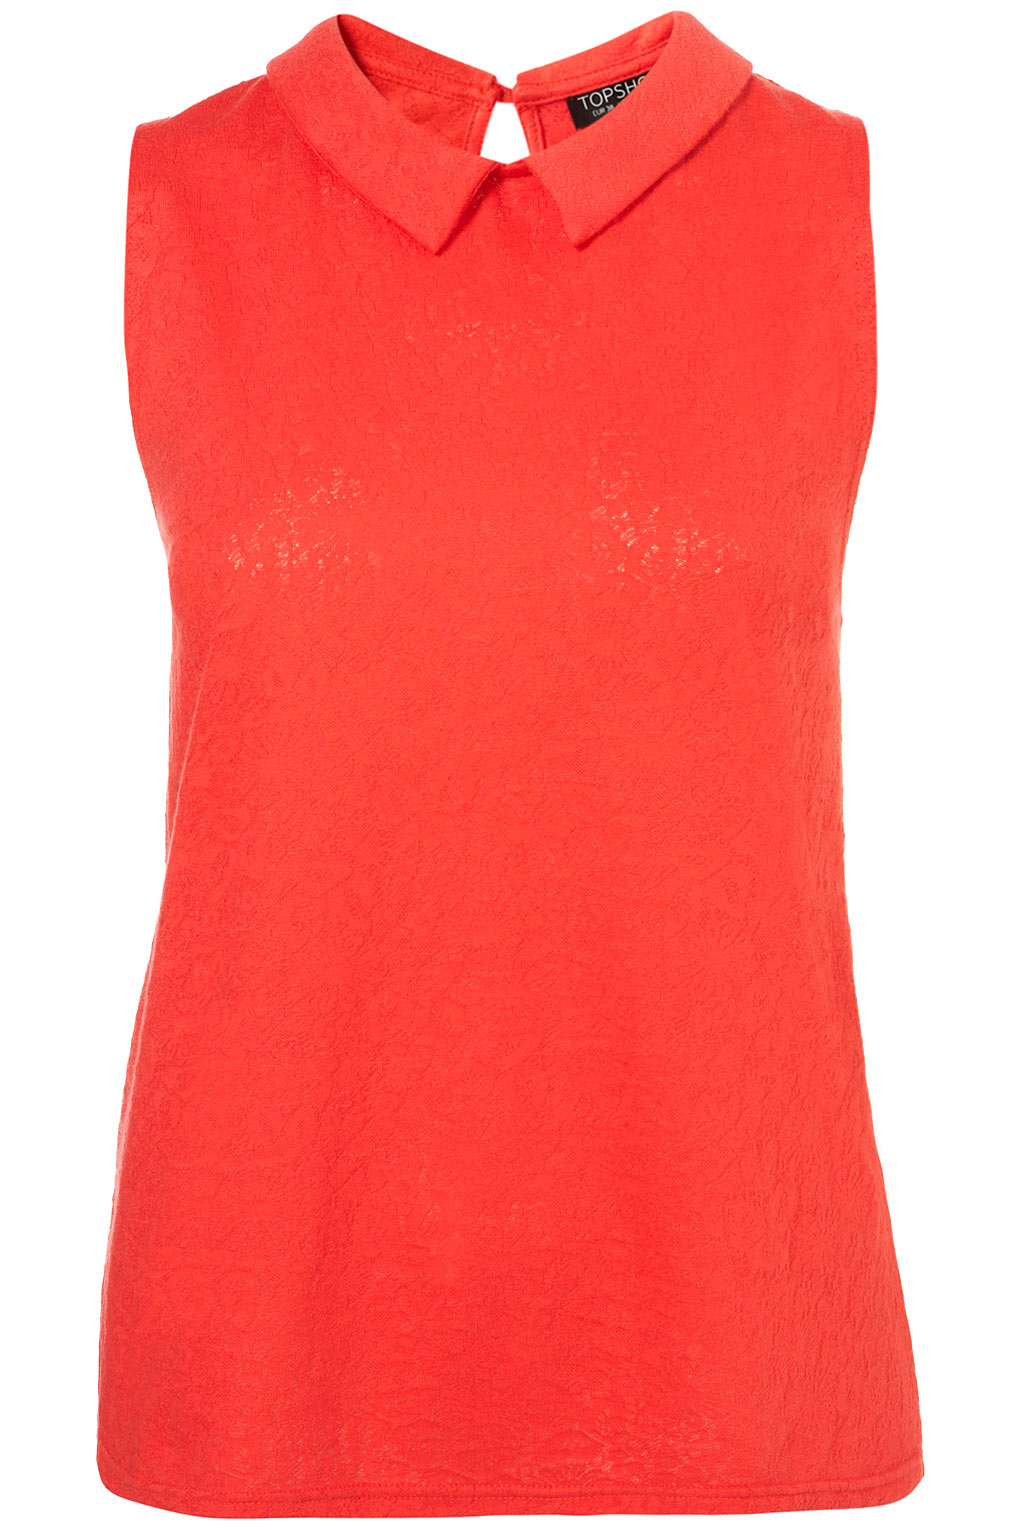 Lyst - Topshop Lace Collar Top in Red